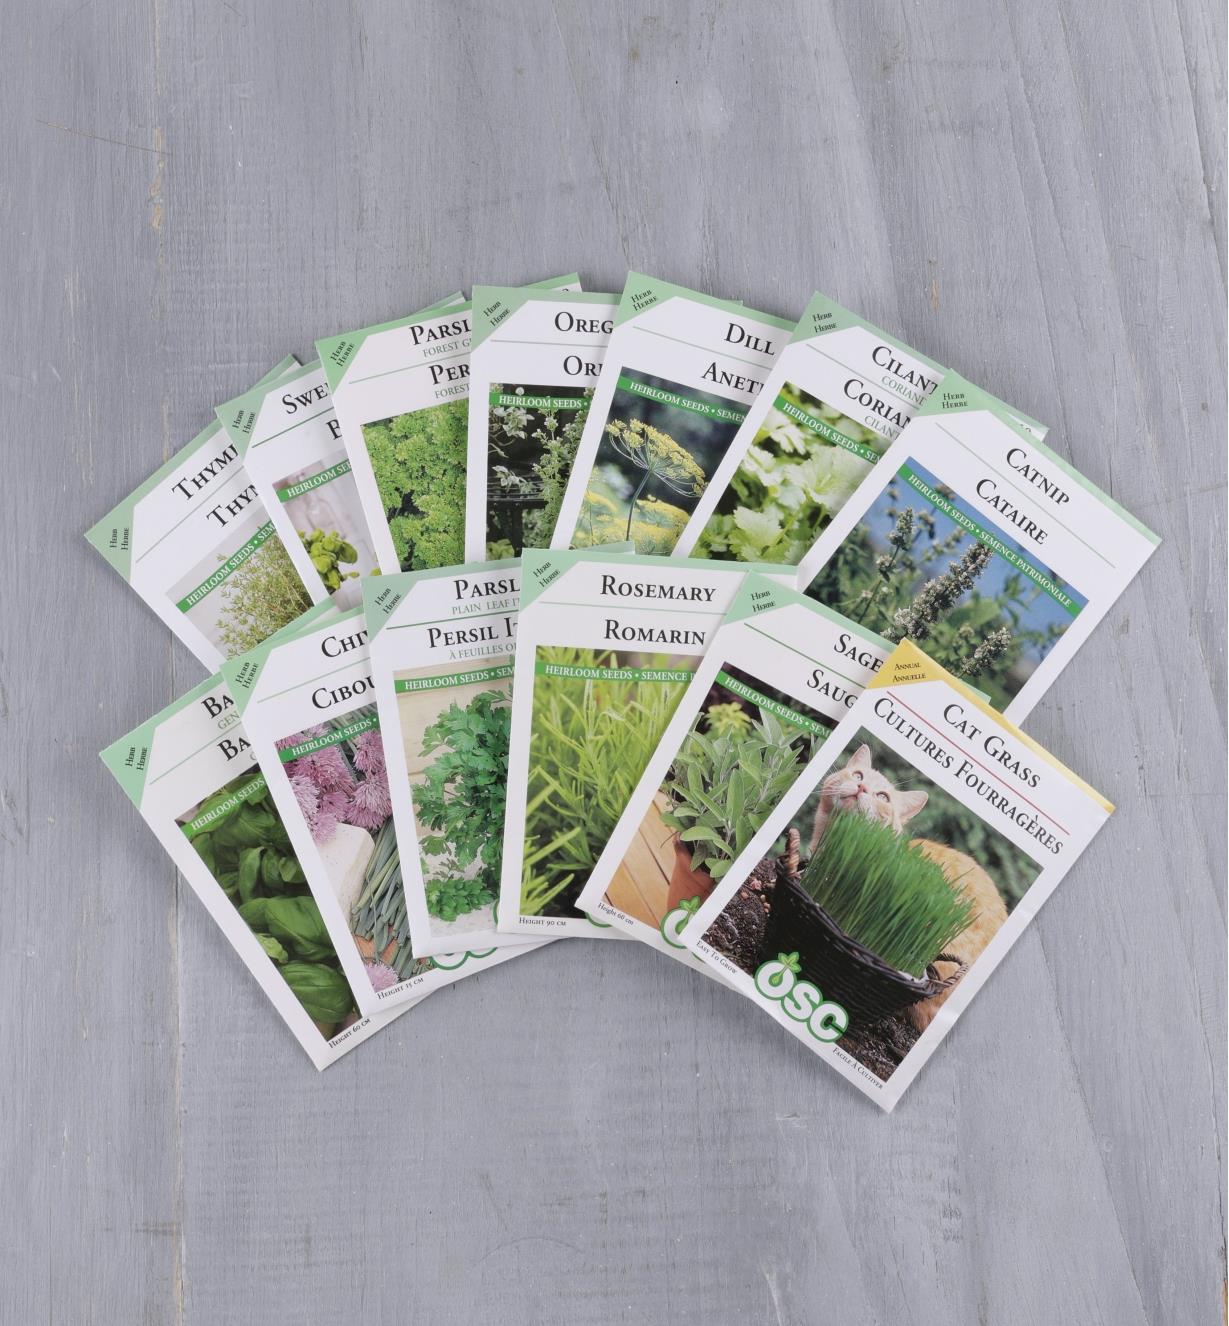 OSC Herb Seed Packets